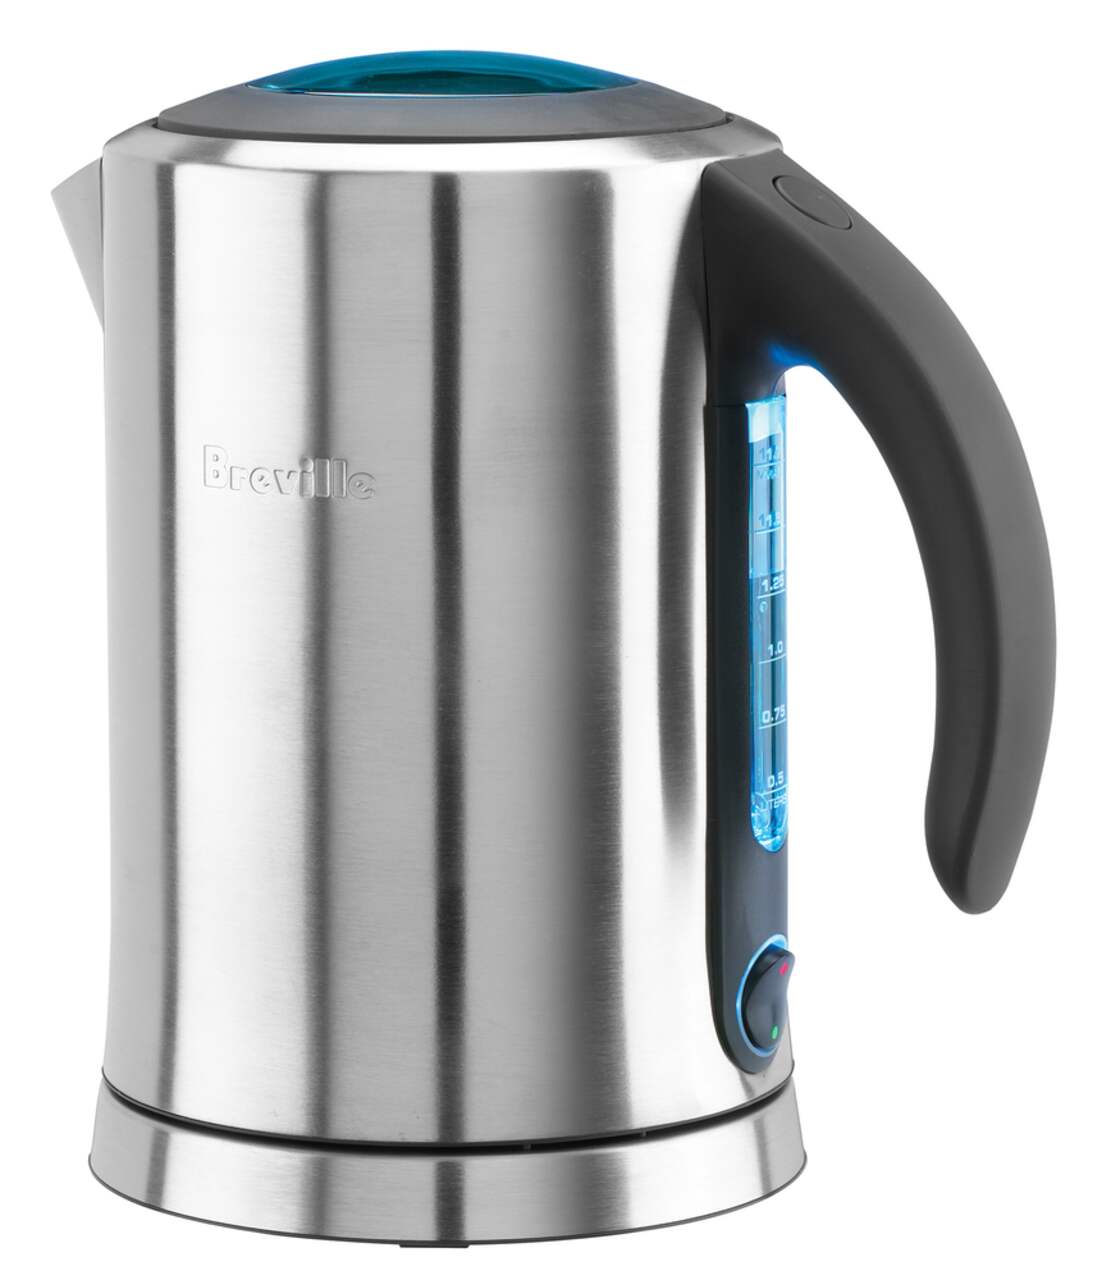 https://media-www.canadiantire.ca/product/living/kitchen/kitchen-appliances/0430263/breville-1-7l-stainless-steel-ikon-kettle-e4c39dec-07aa-4cb6-aeaa-3e4967429ce4.png?imdensity=1&imwidth=640&impolicy=mZoom